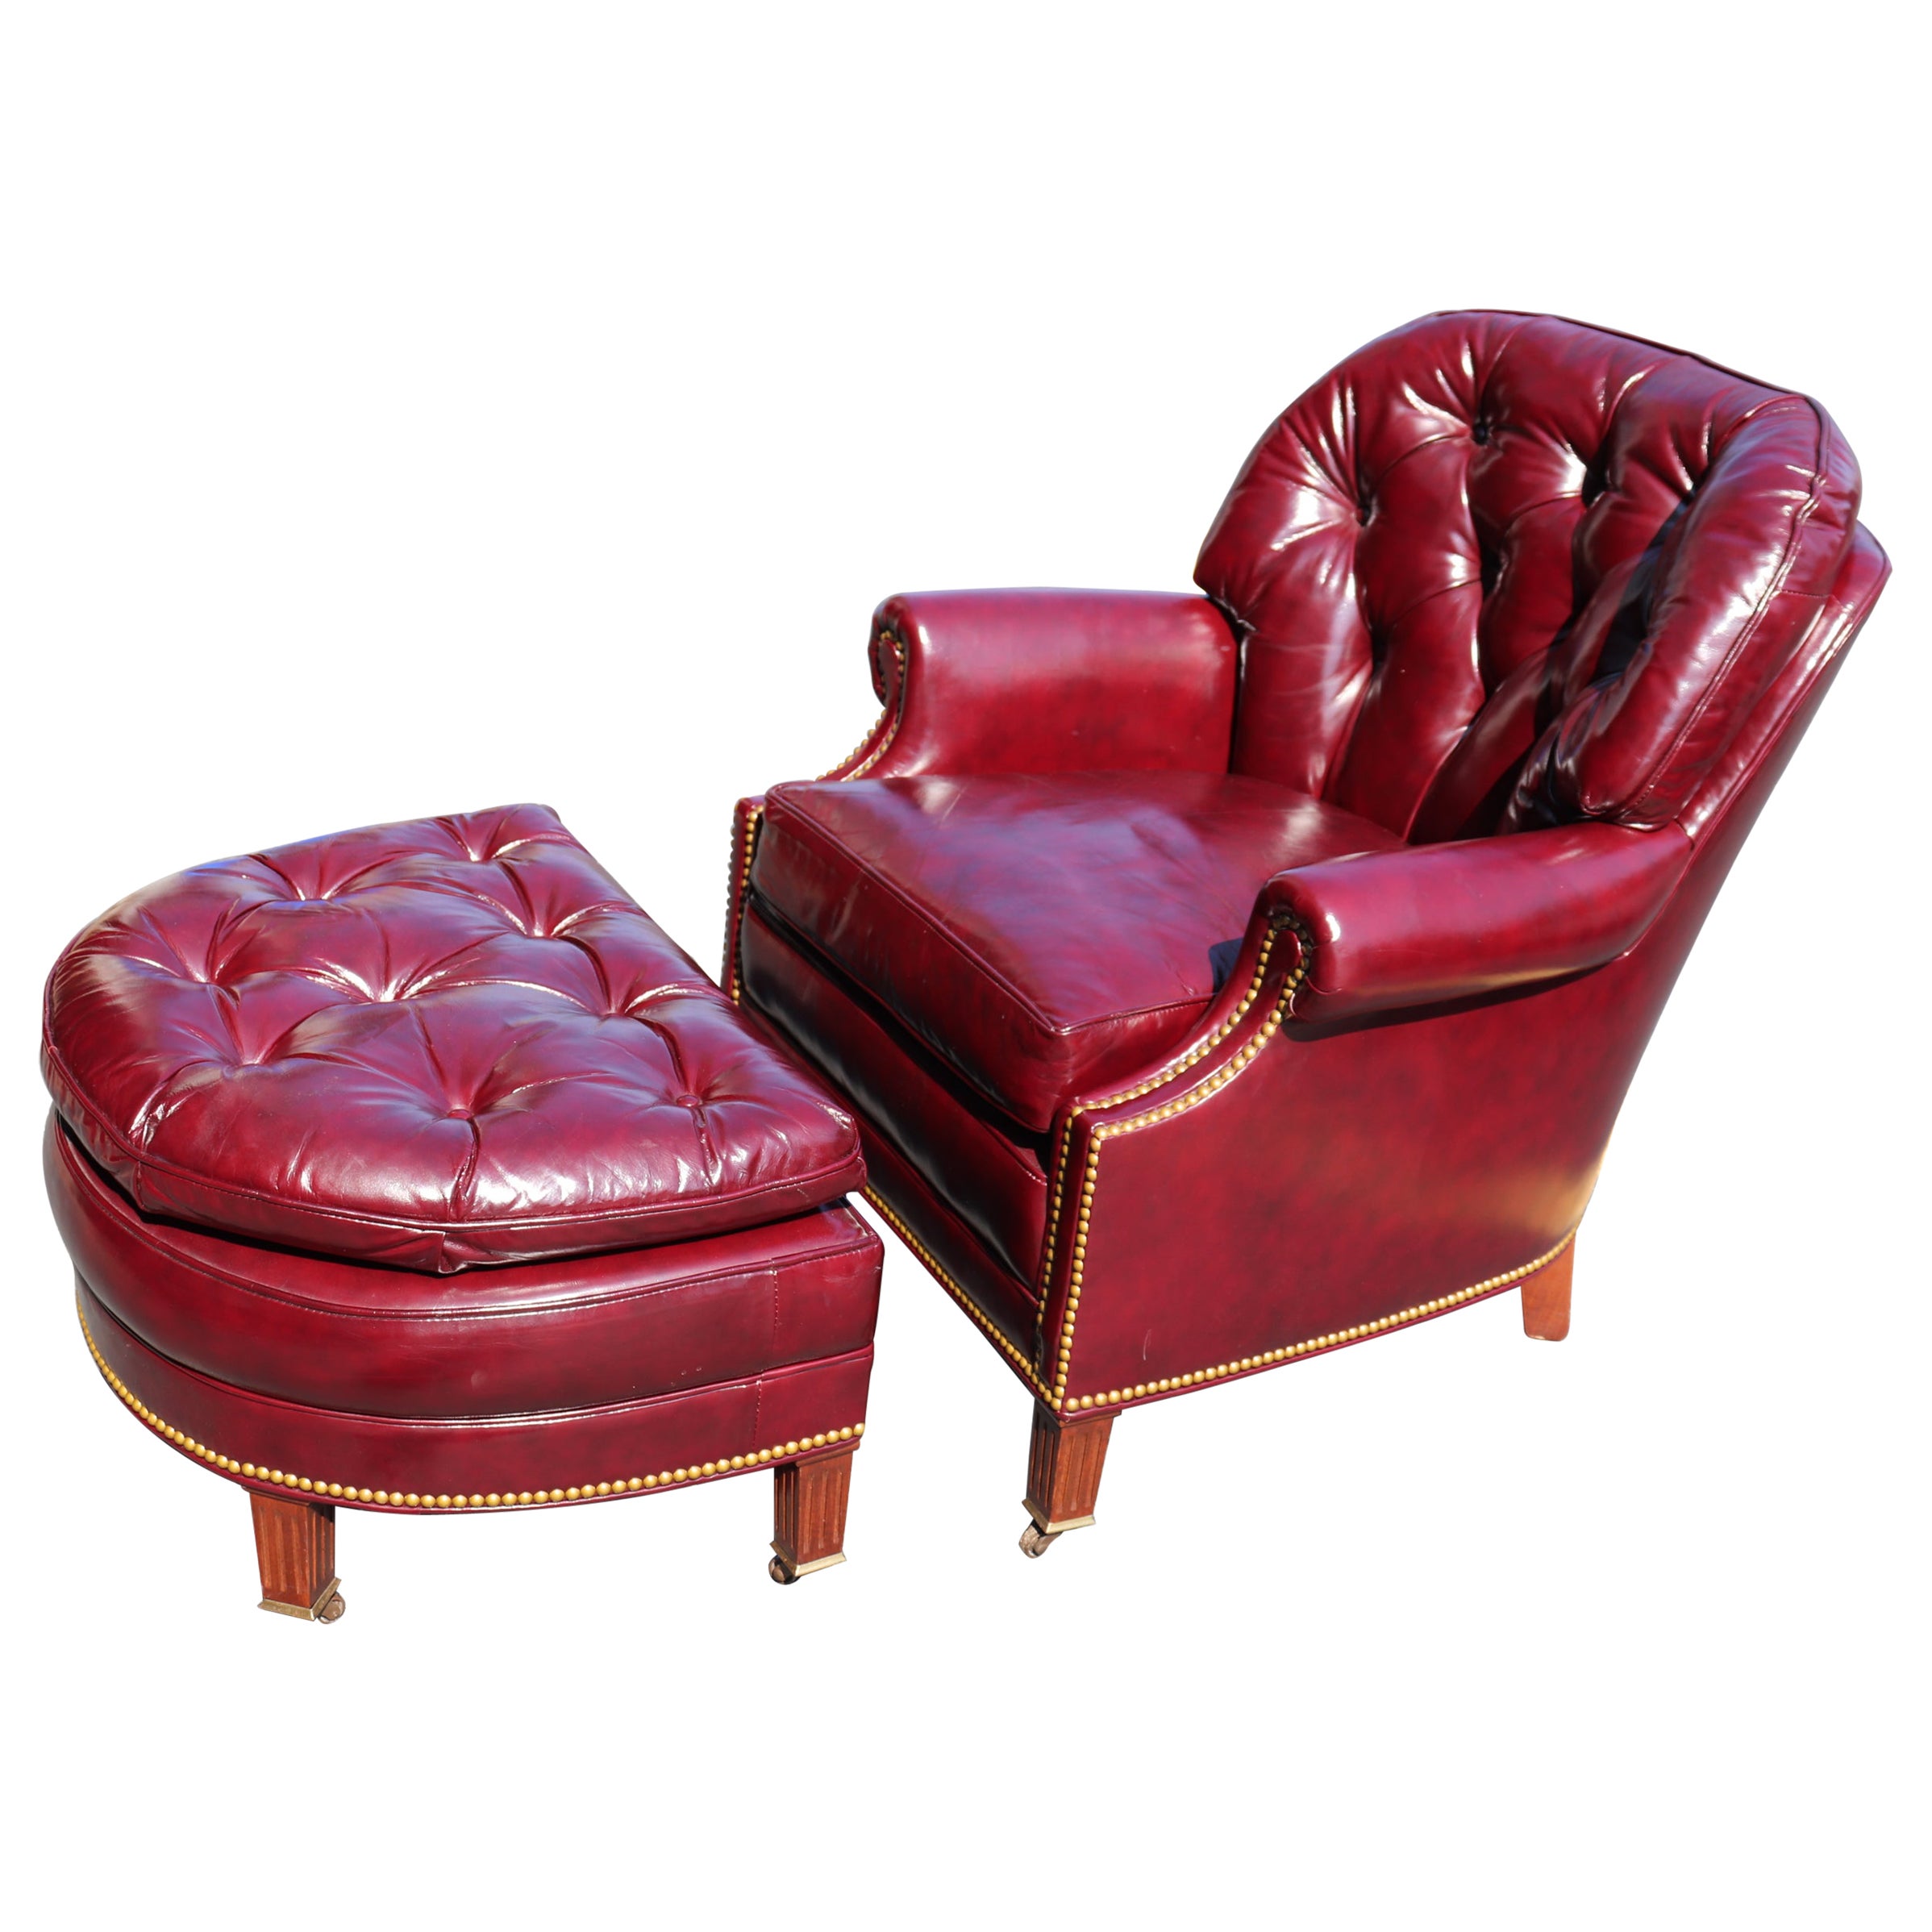 Genuine Leather Burgundy Hancock & Moore Chesterfield Club Chair and Ottoman